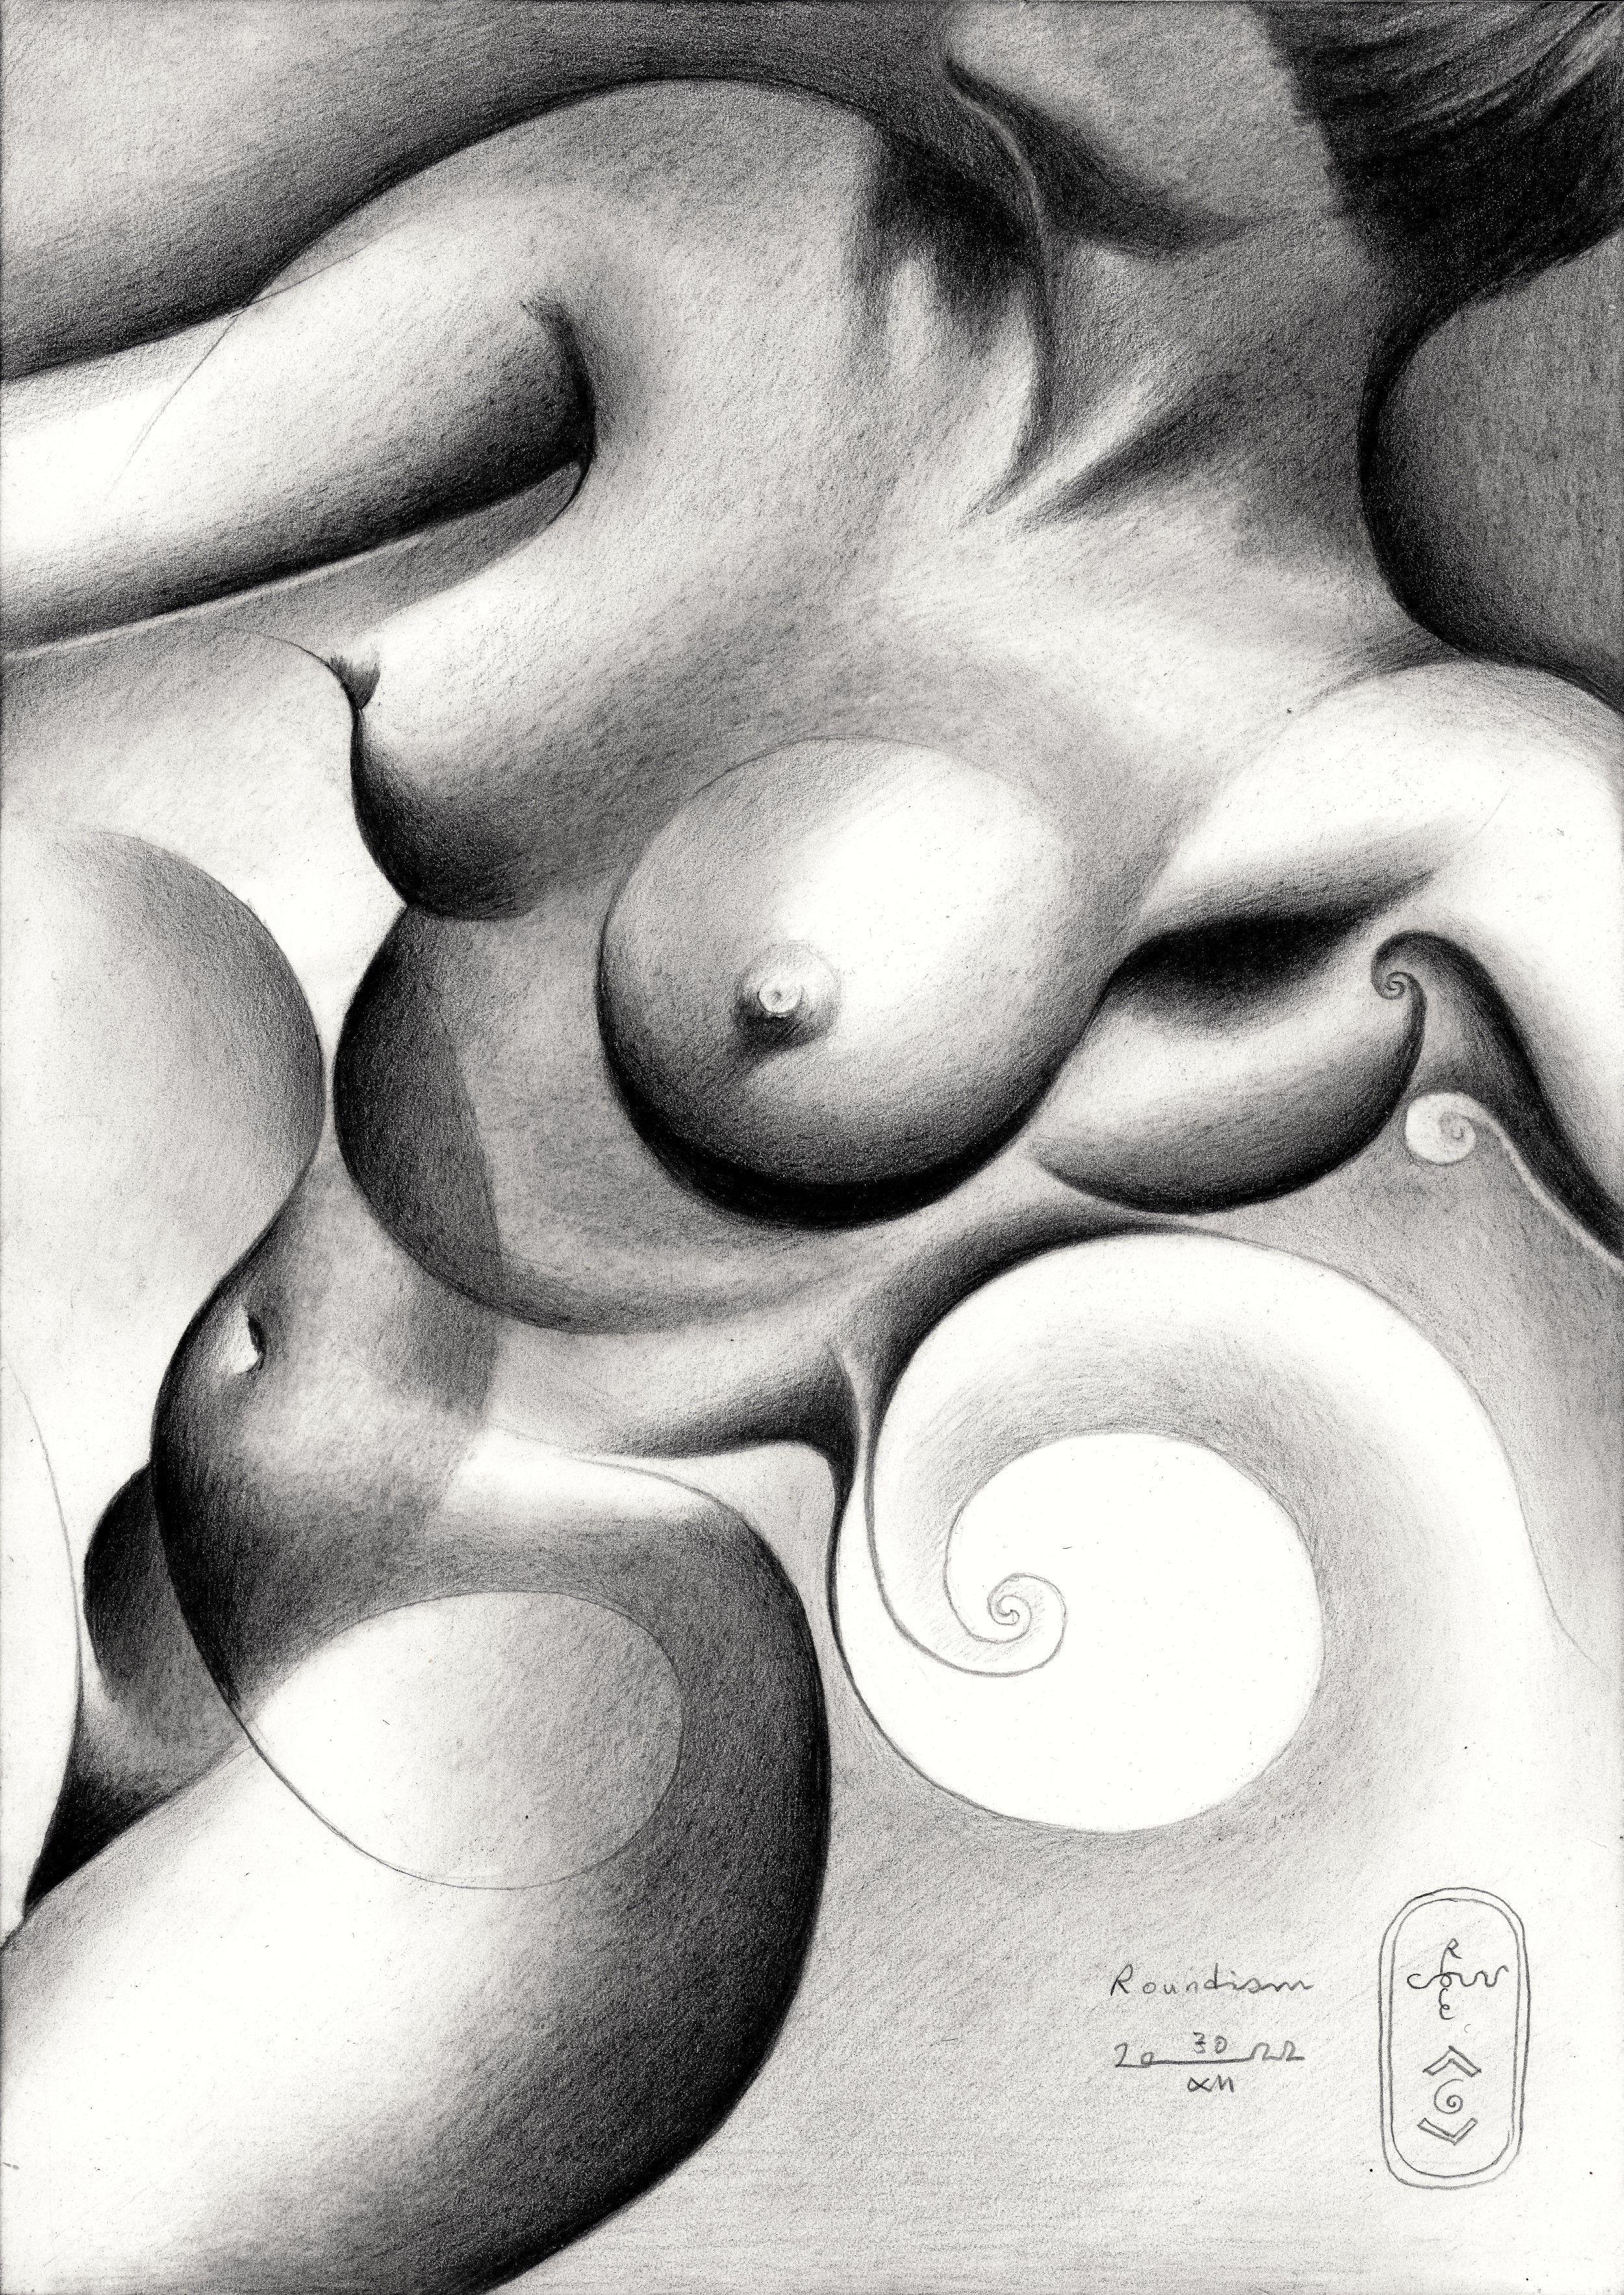 Roundism - 30-12-22, Drawing, Pencil/Colored Pencil on Paper - Art by Corne Akkers